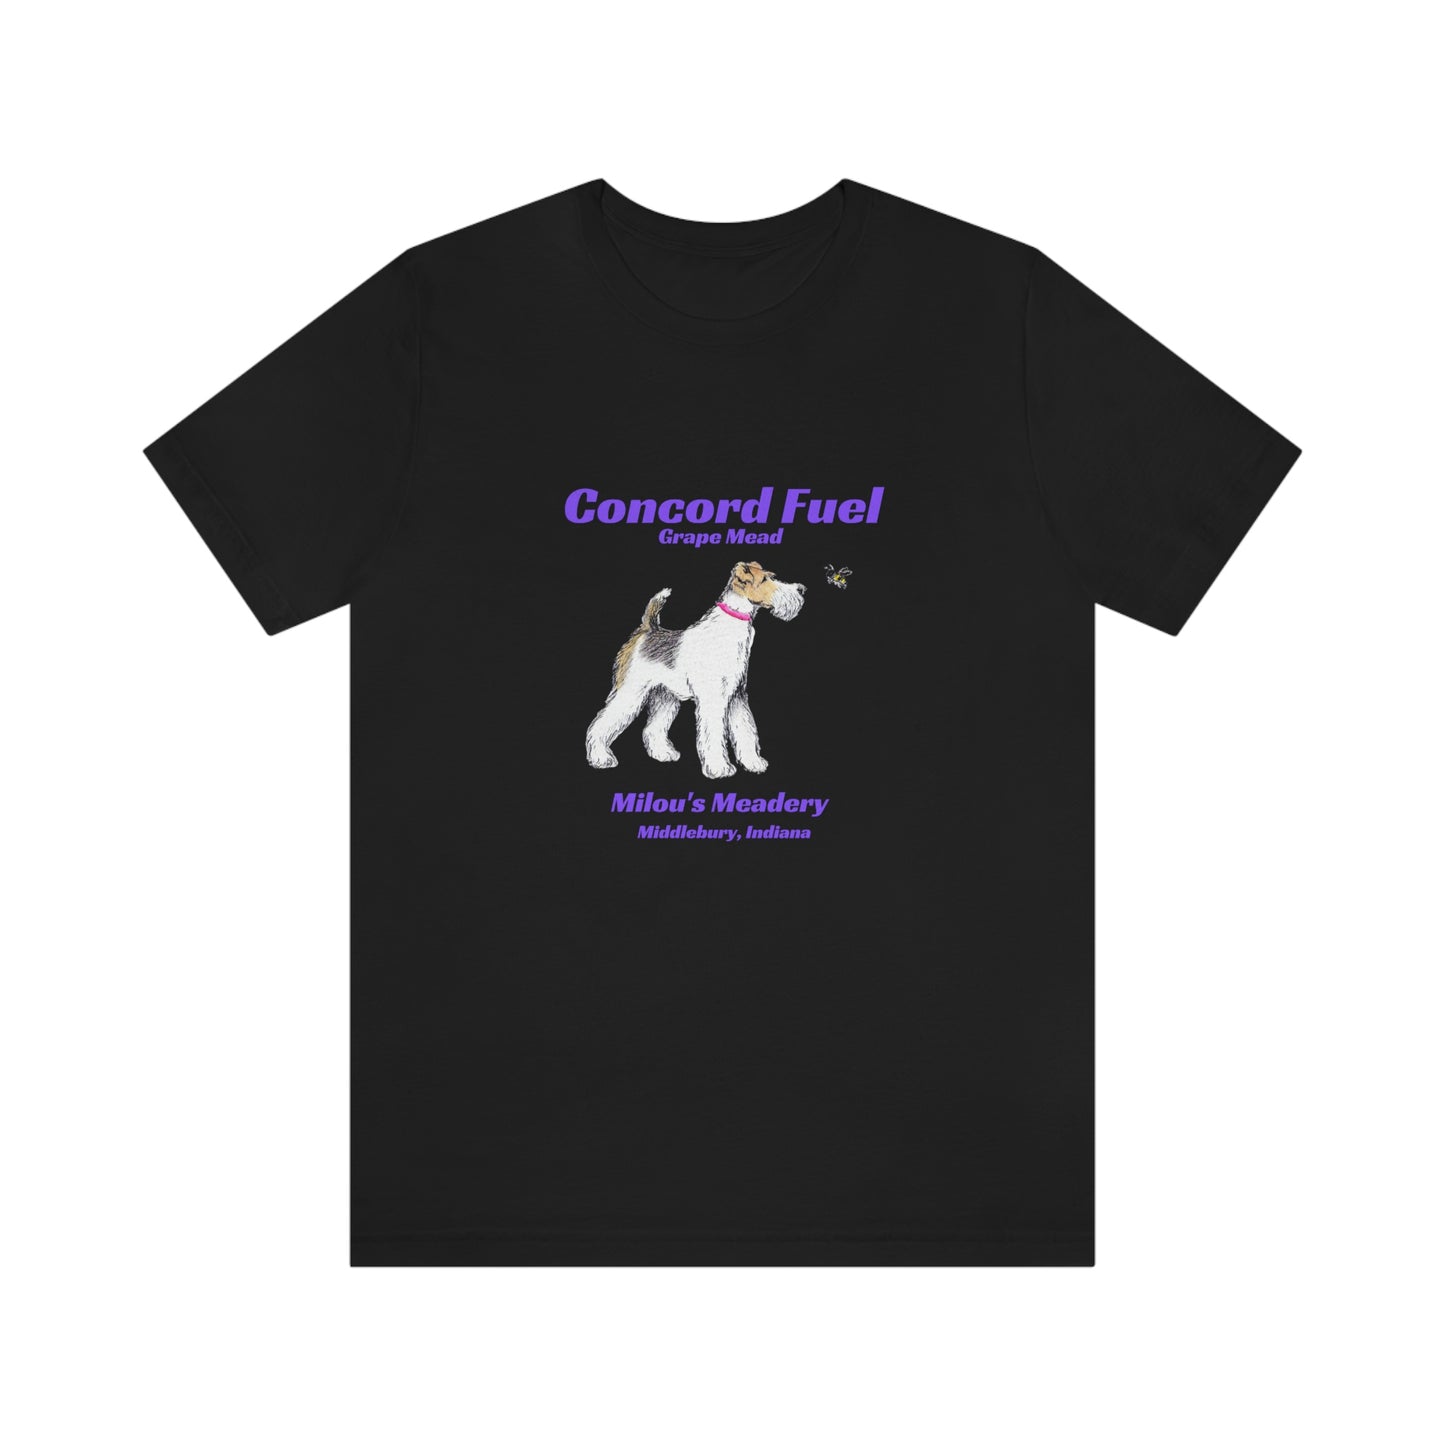 Milou's Meadery Concord Fuel T-Shirt